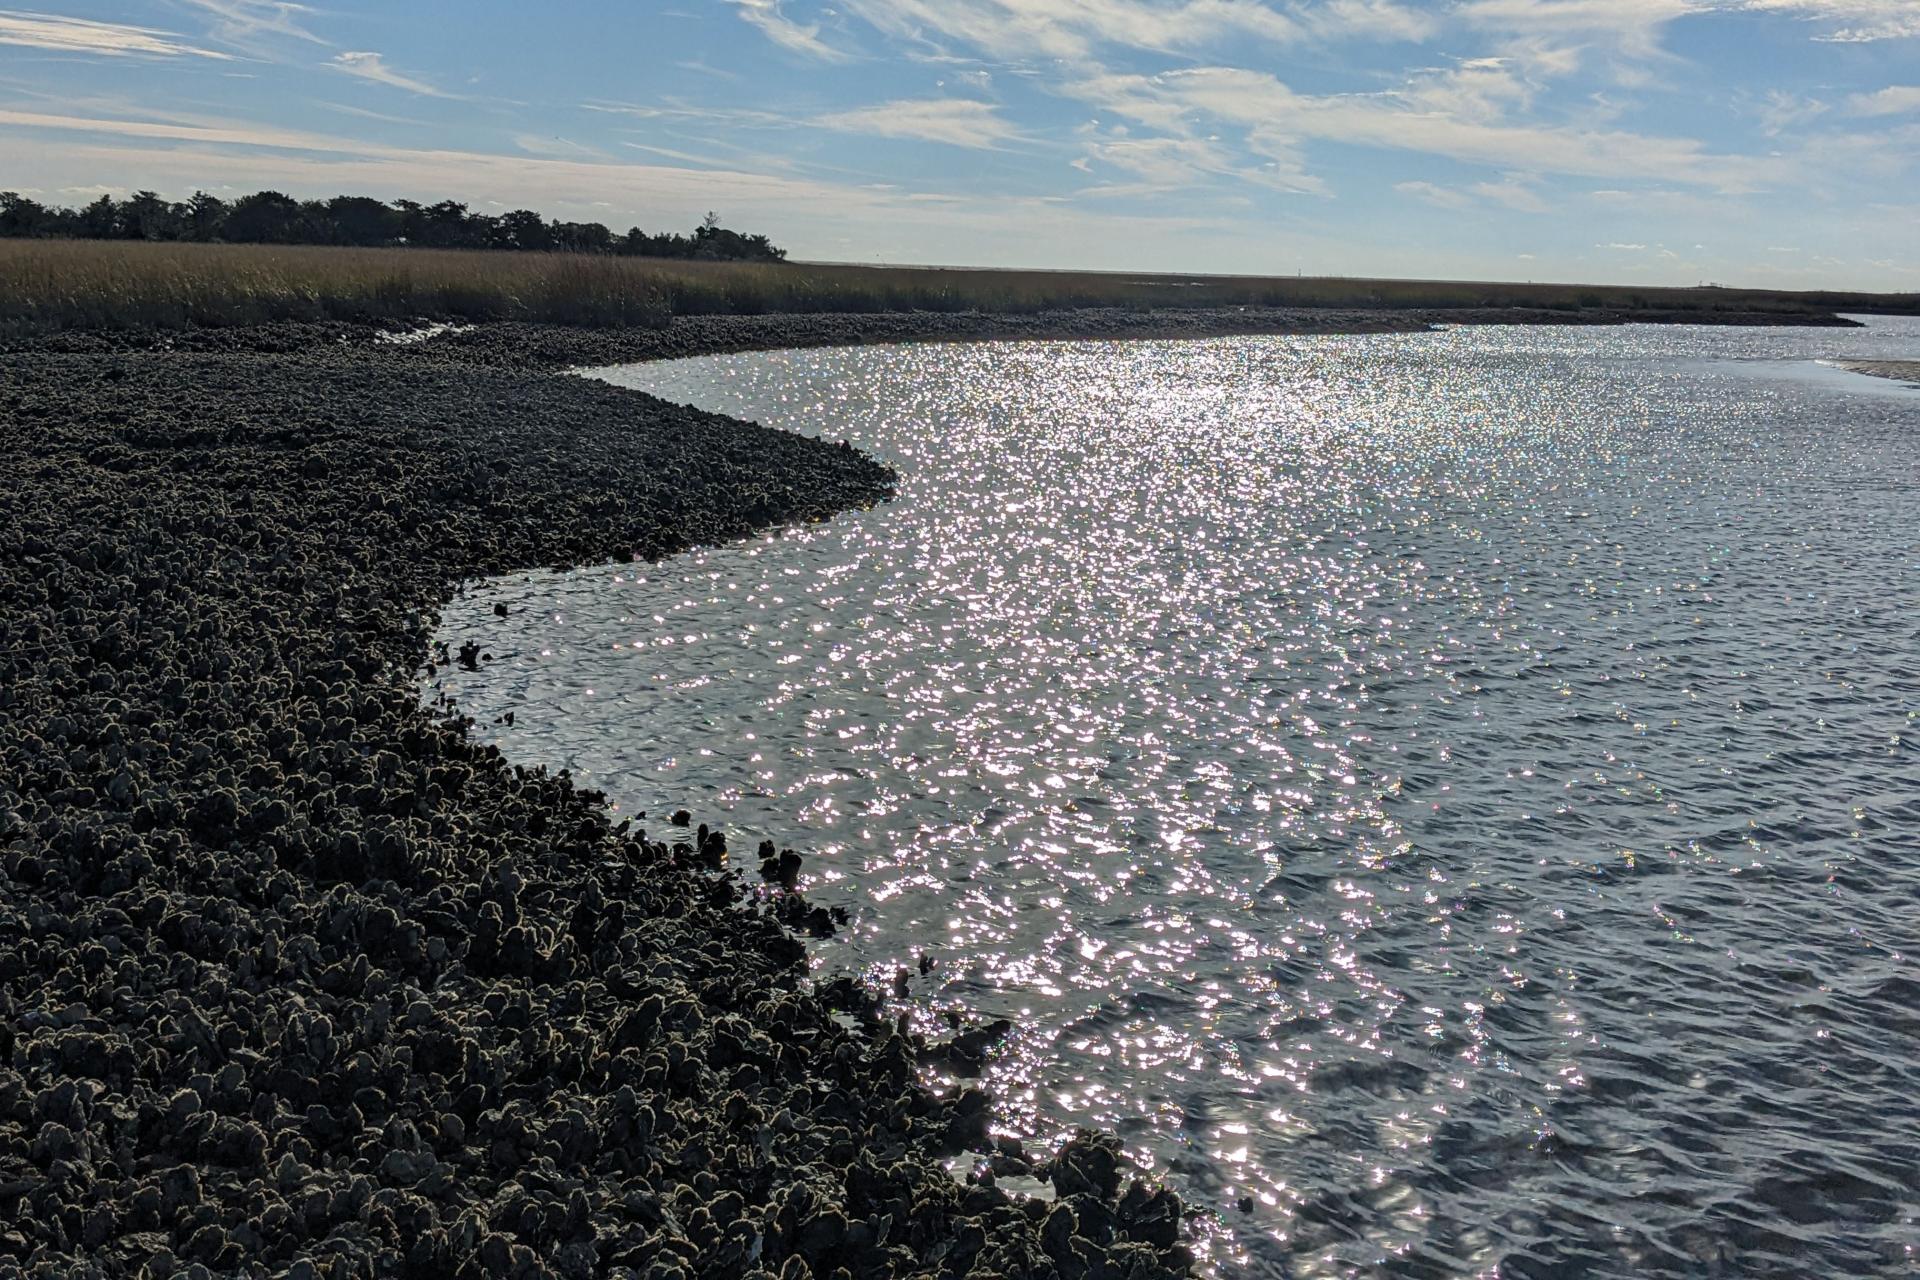 A fringing, intertidal oyster reef